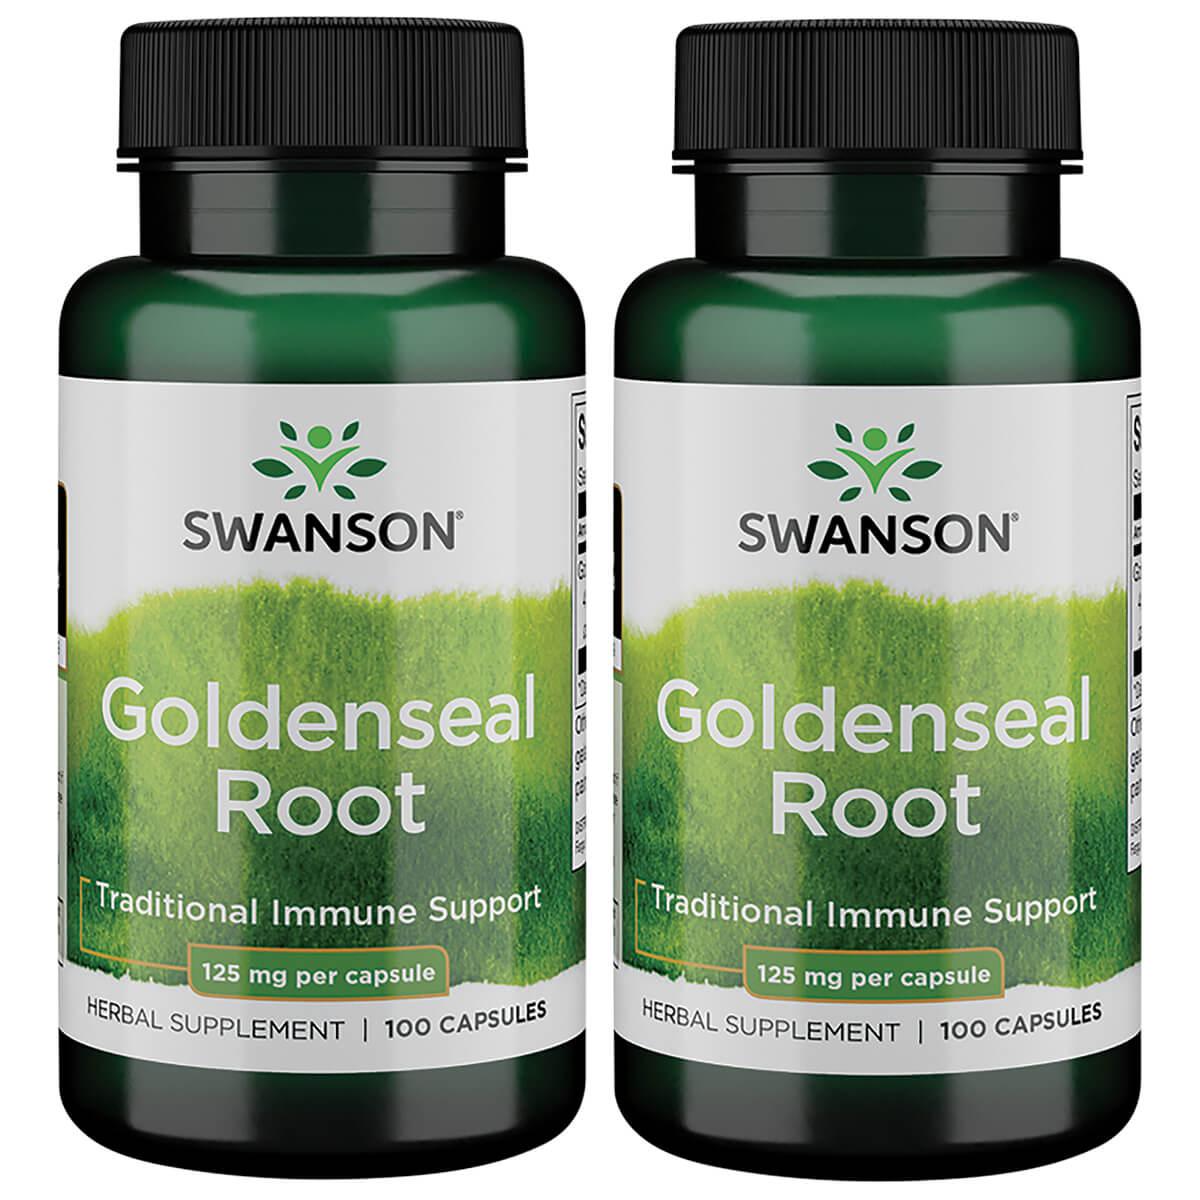 Swanson Premium Goldenseal Root 2 Pack Vitamin 125 mg 100 Caps Herbs and Supplements